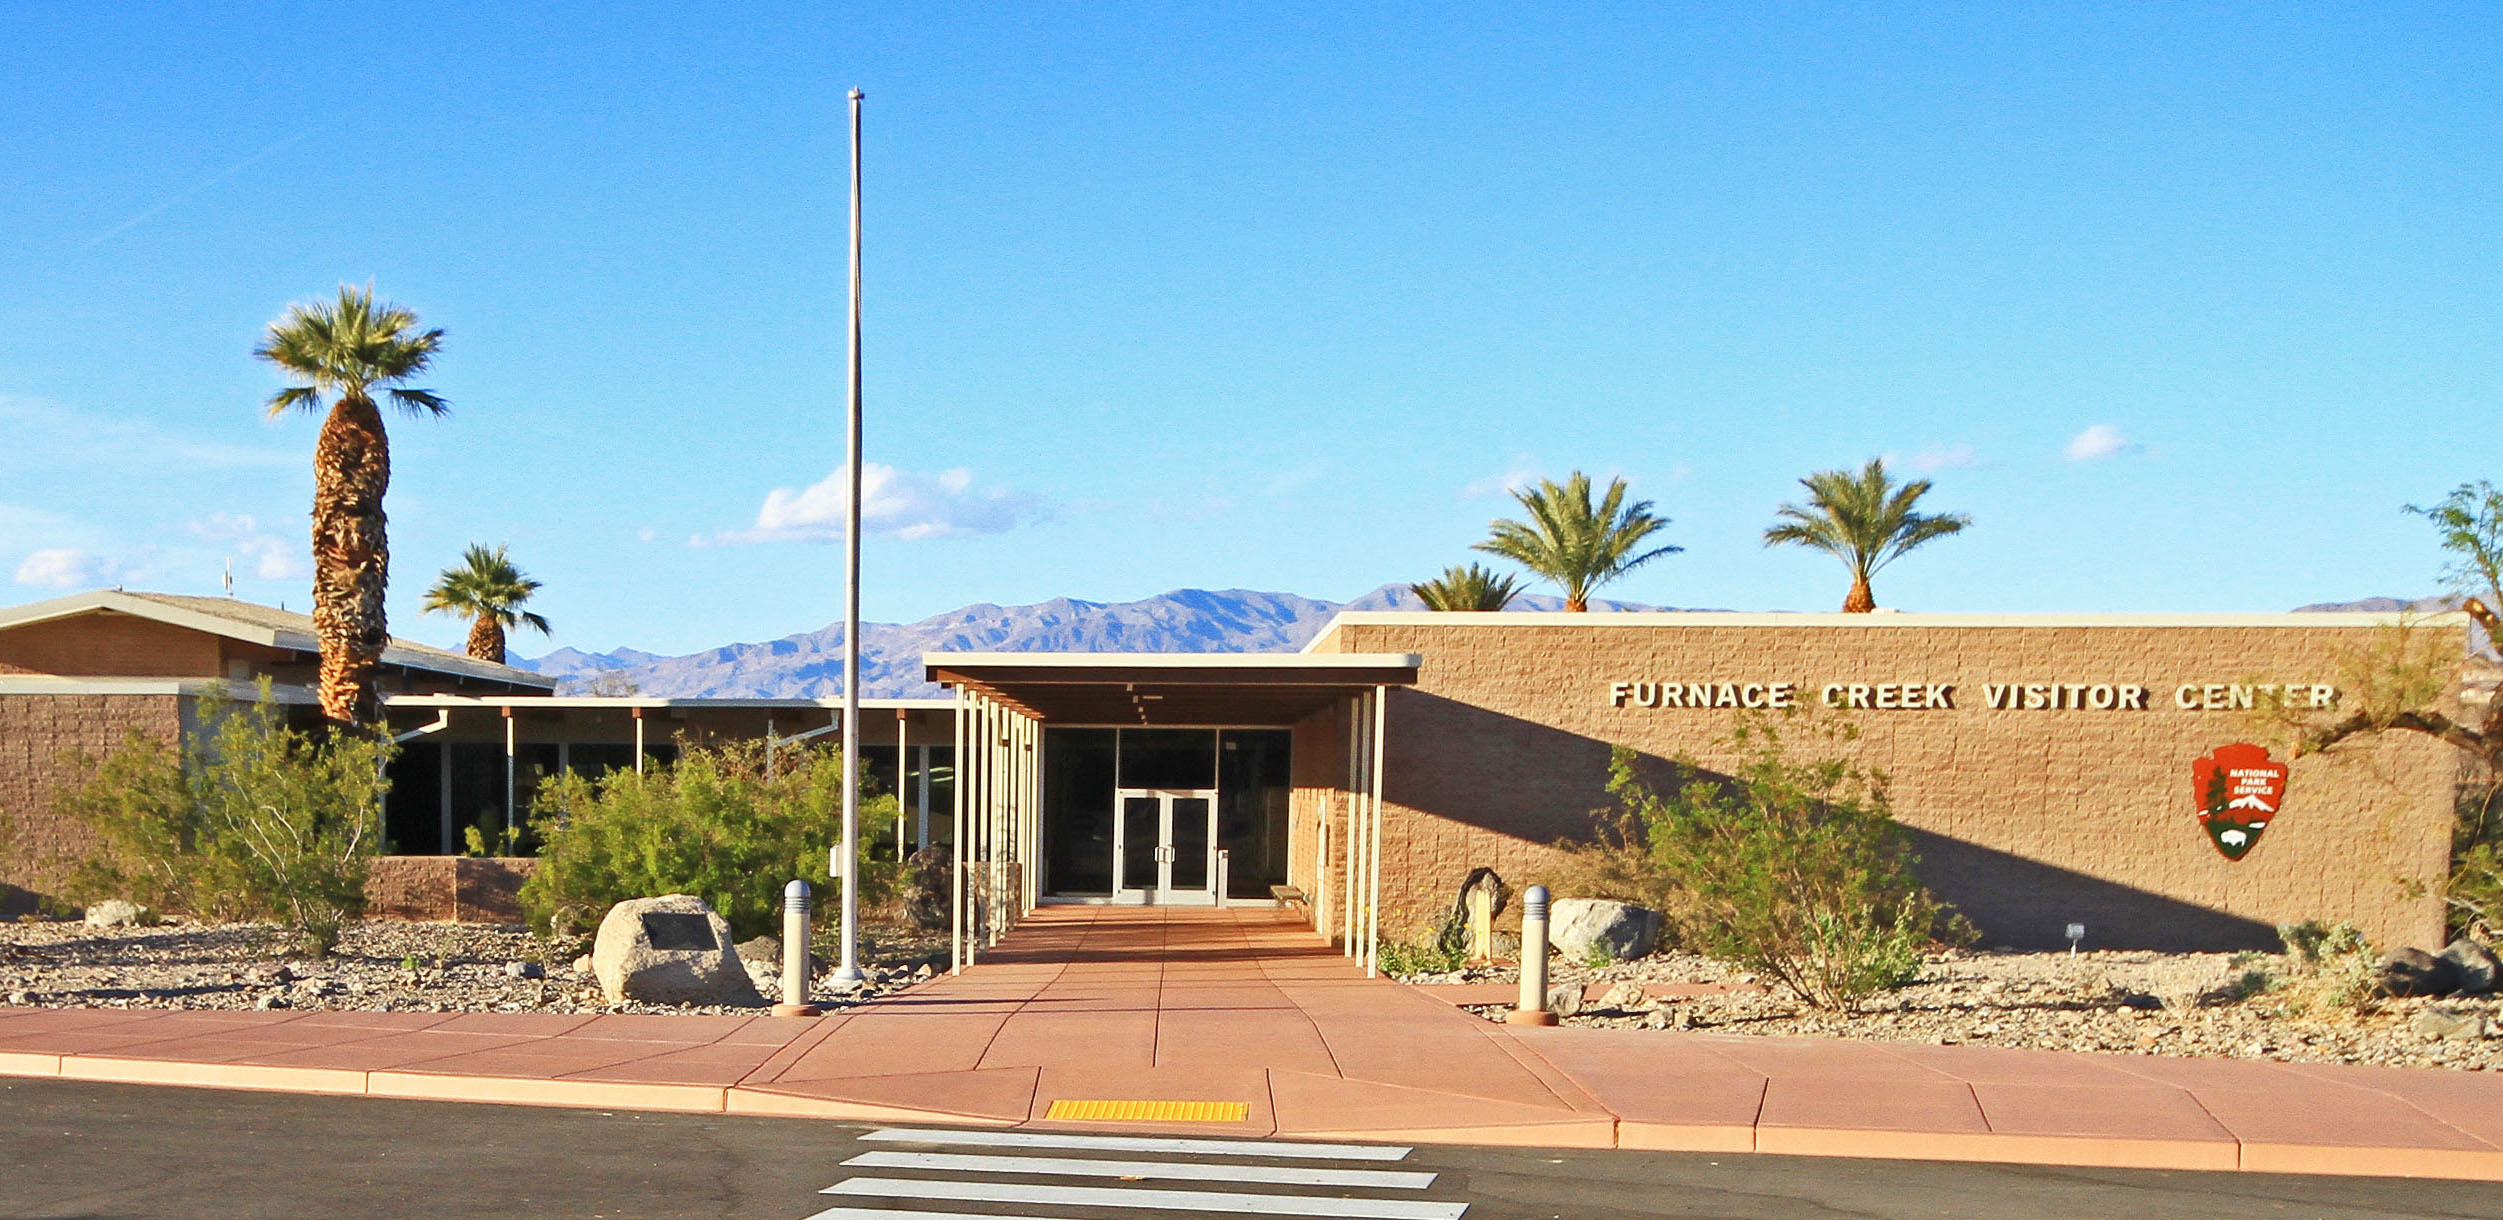 Furnace Creek Visitor Center, Death Valley NP